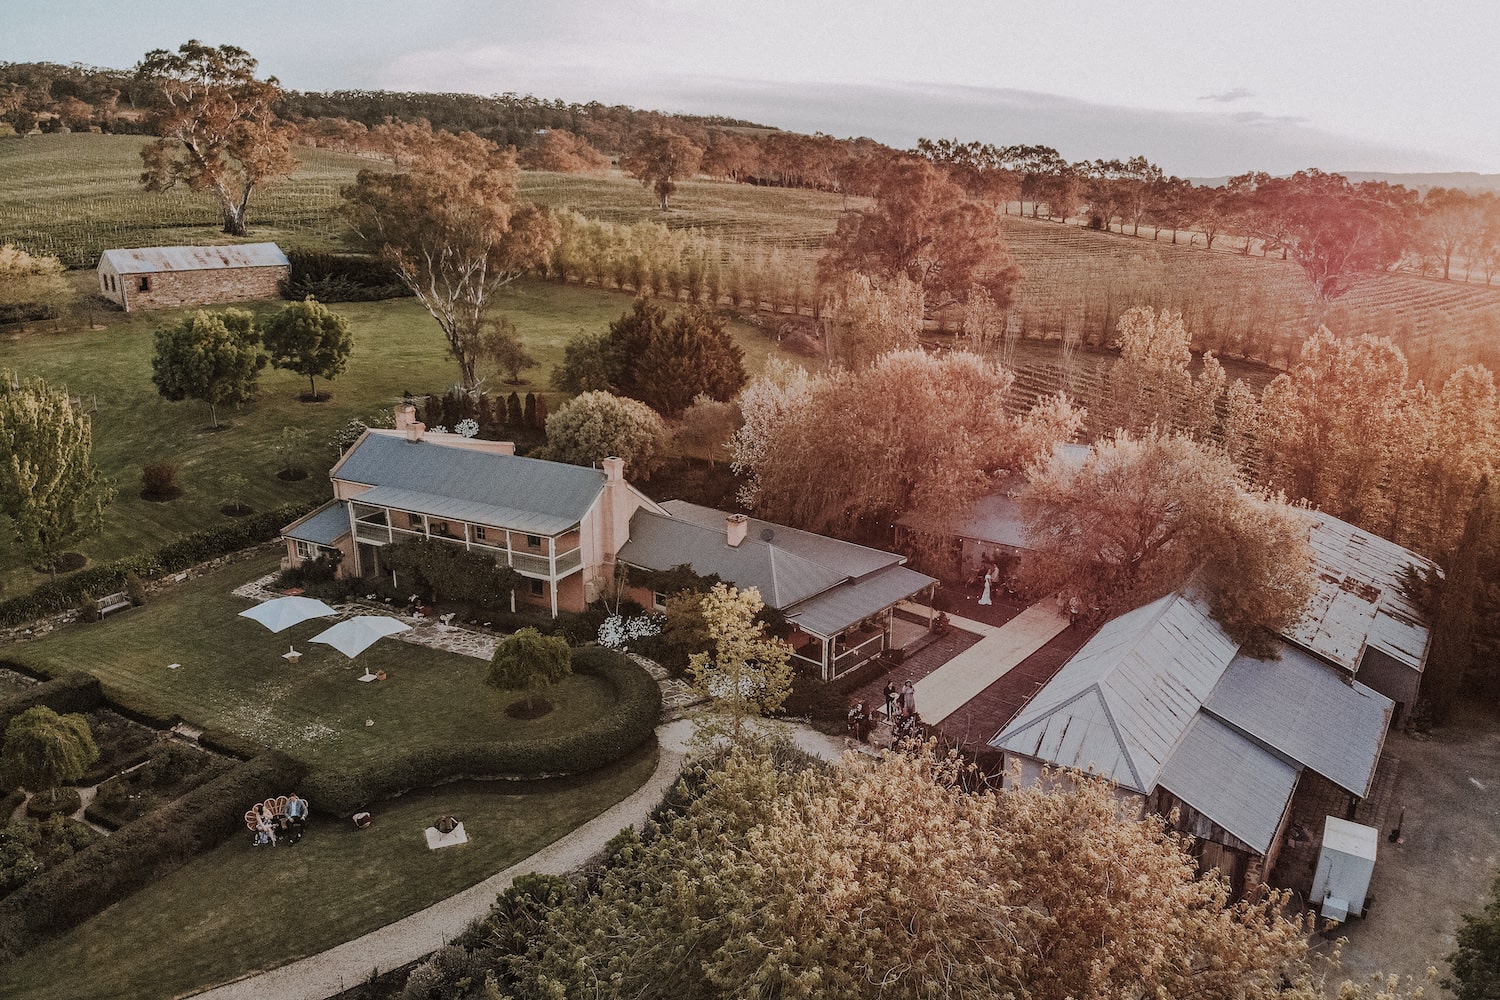 Birds eye view of Adelaide Hills property. Rolling green hills, trees, a large house and barns